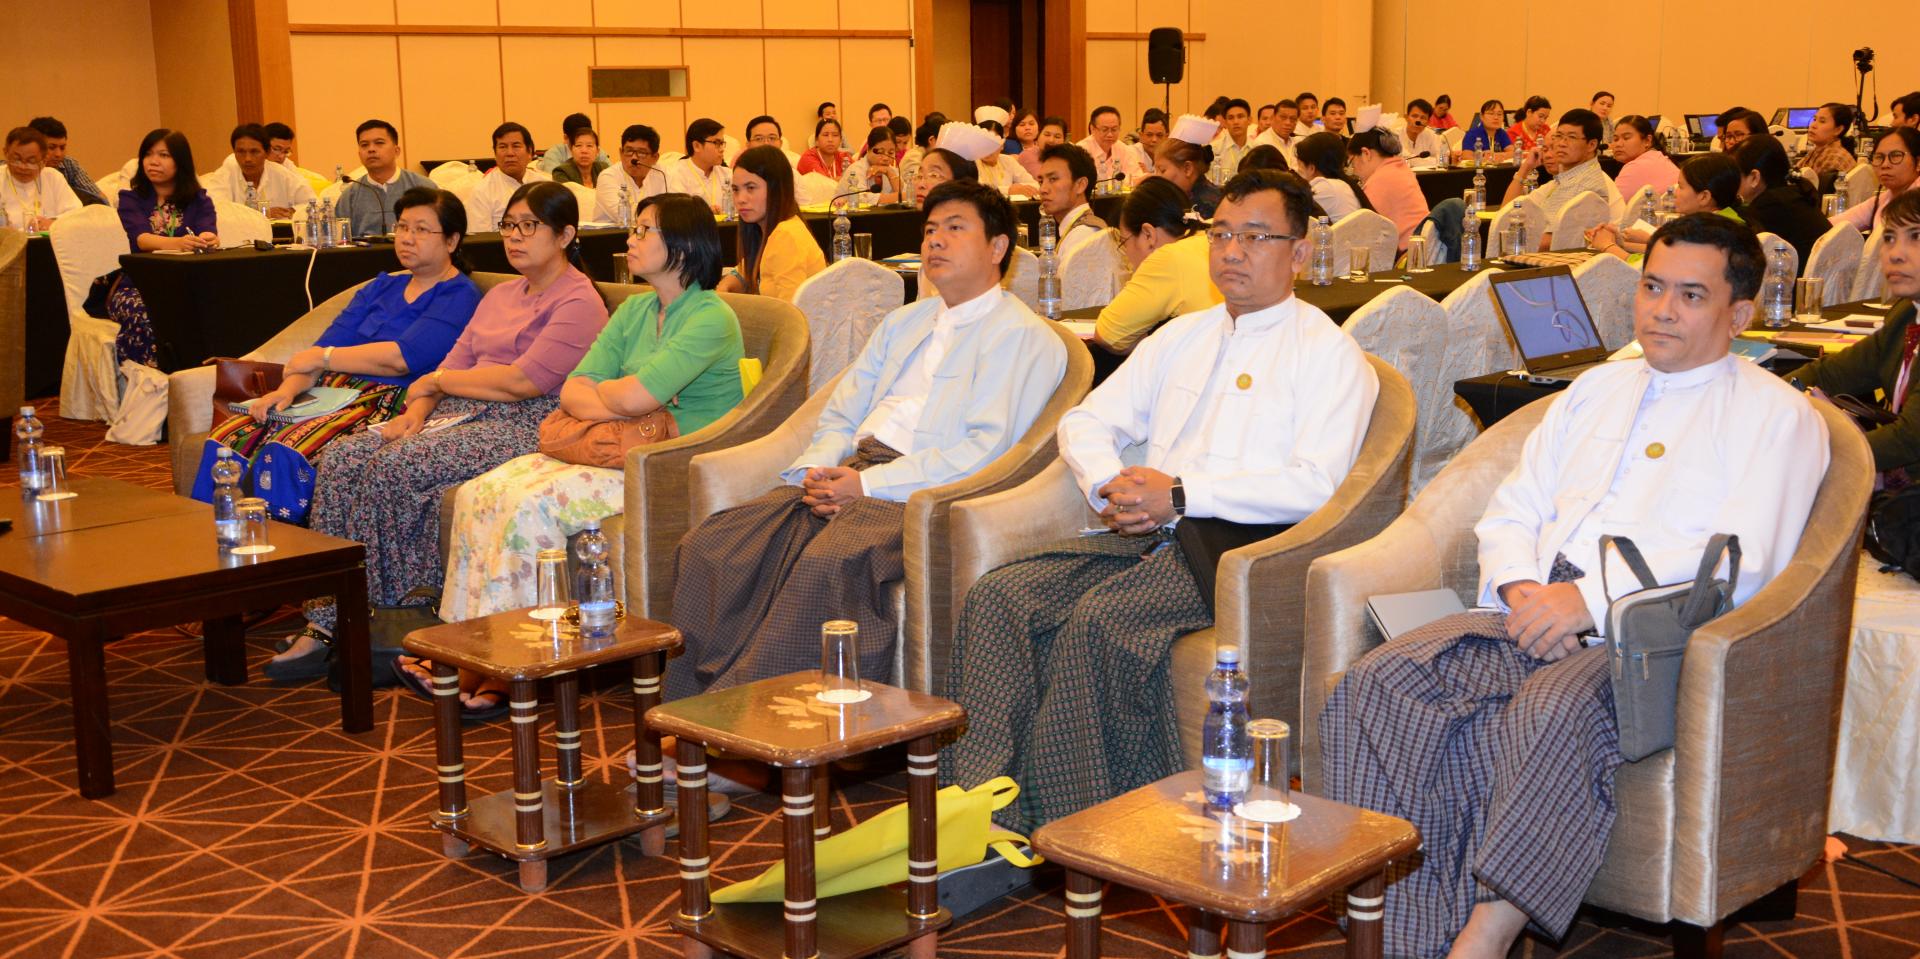 Opening session of the first batch of the training, Nay Pyi Taw, 23 October 2017